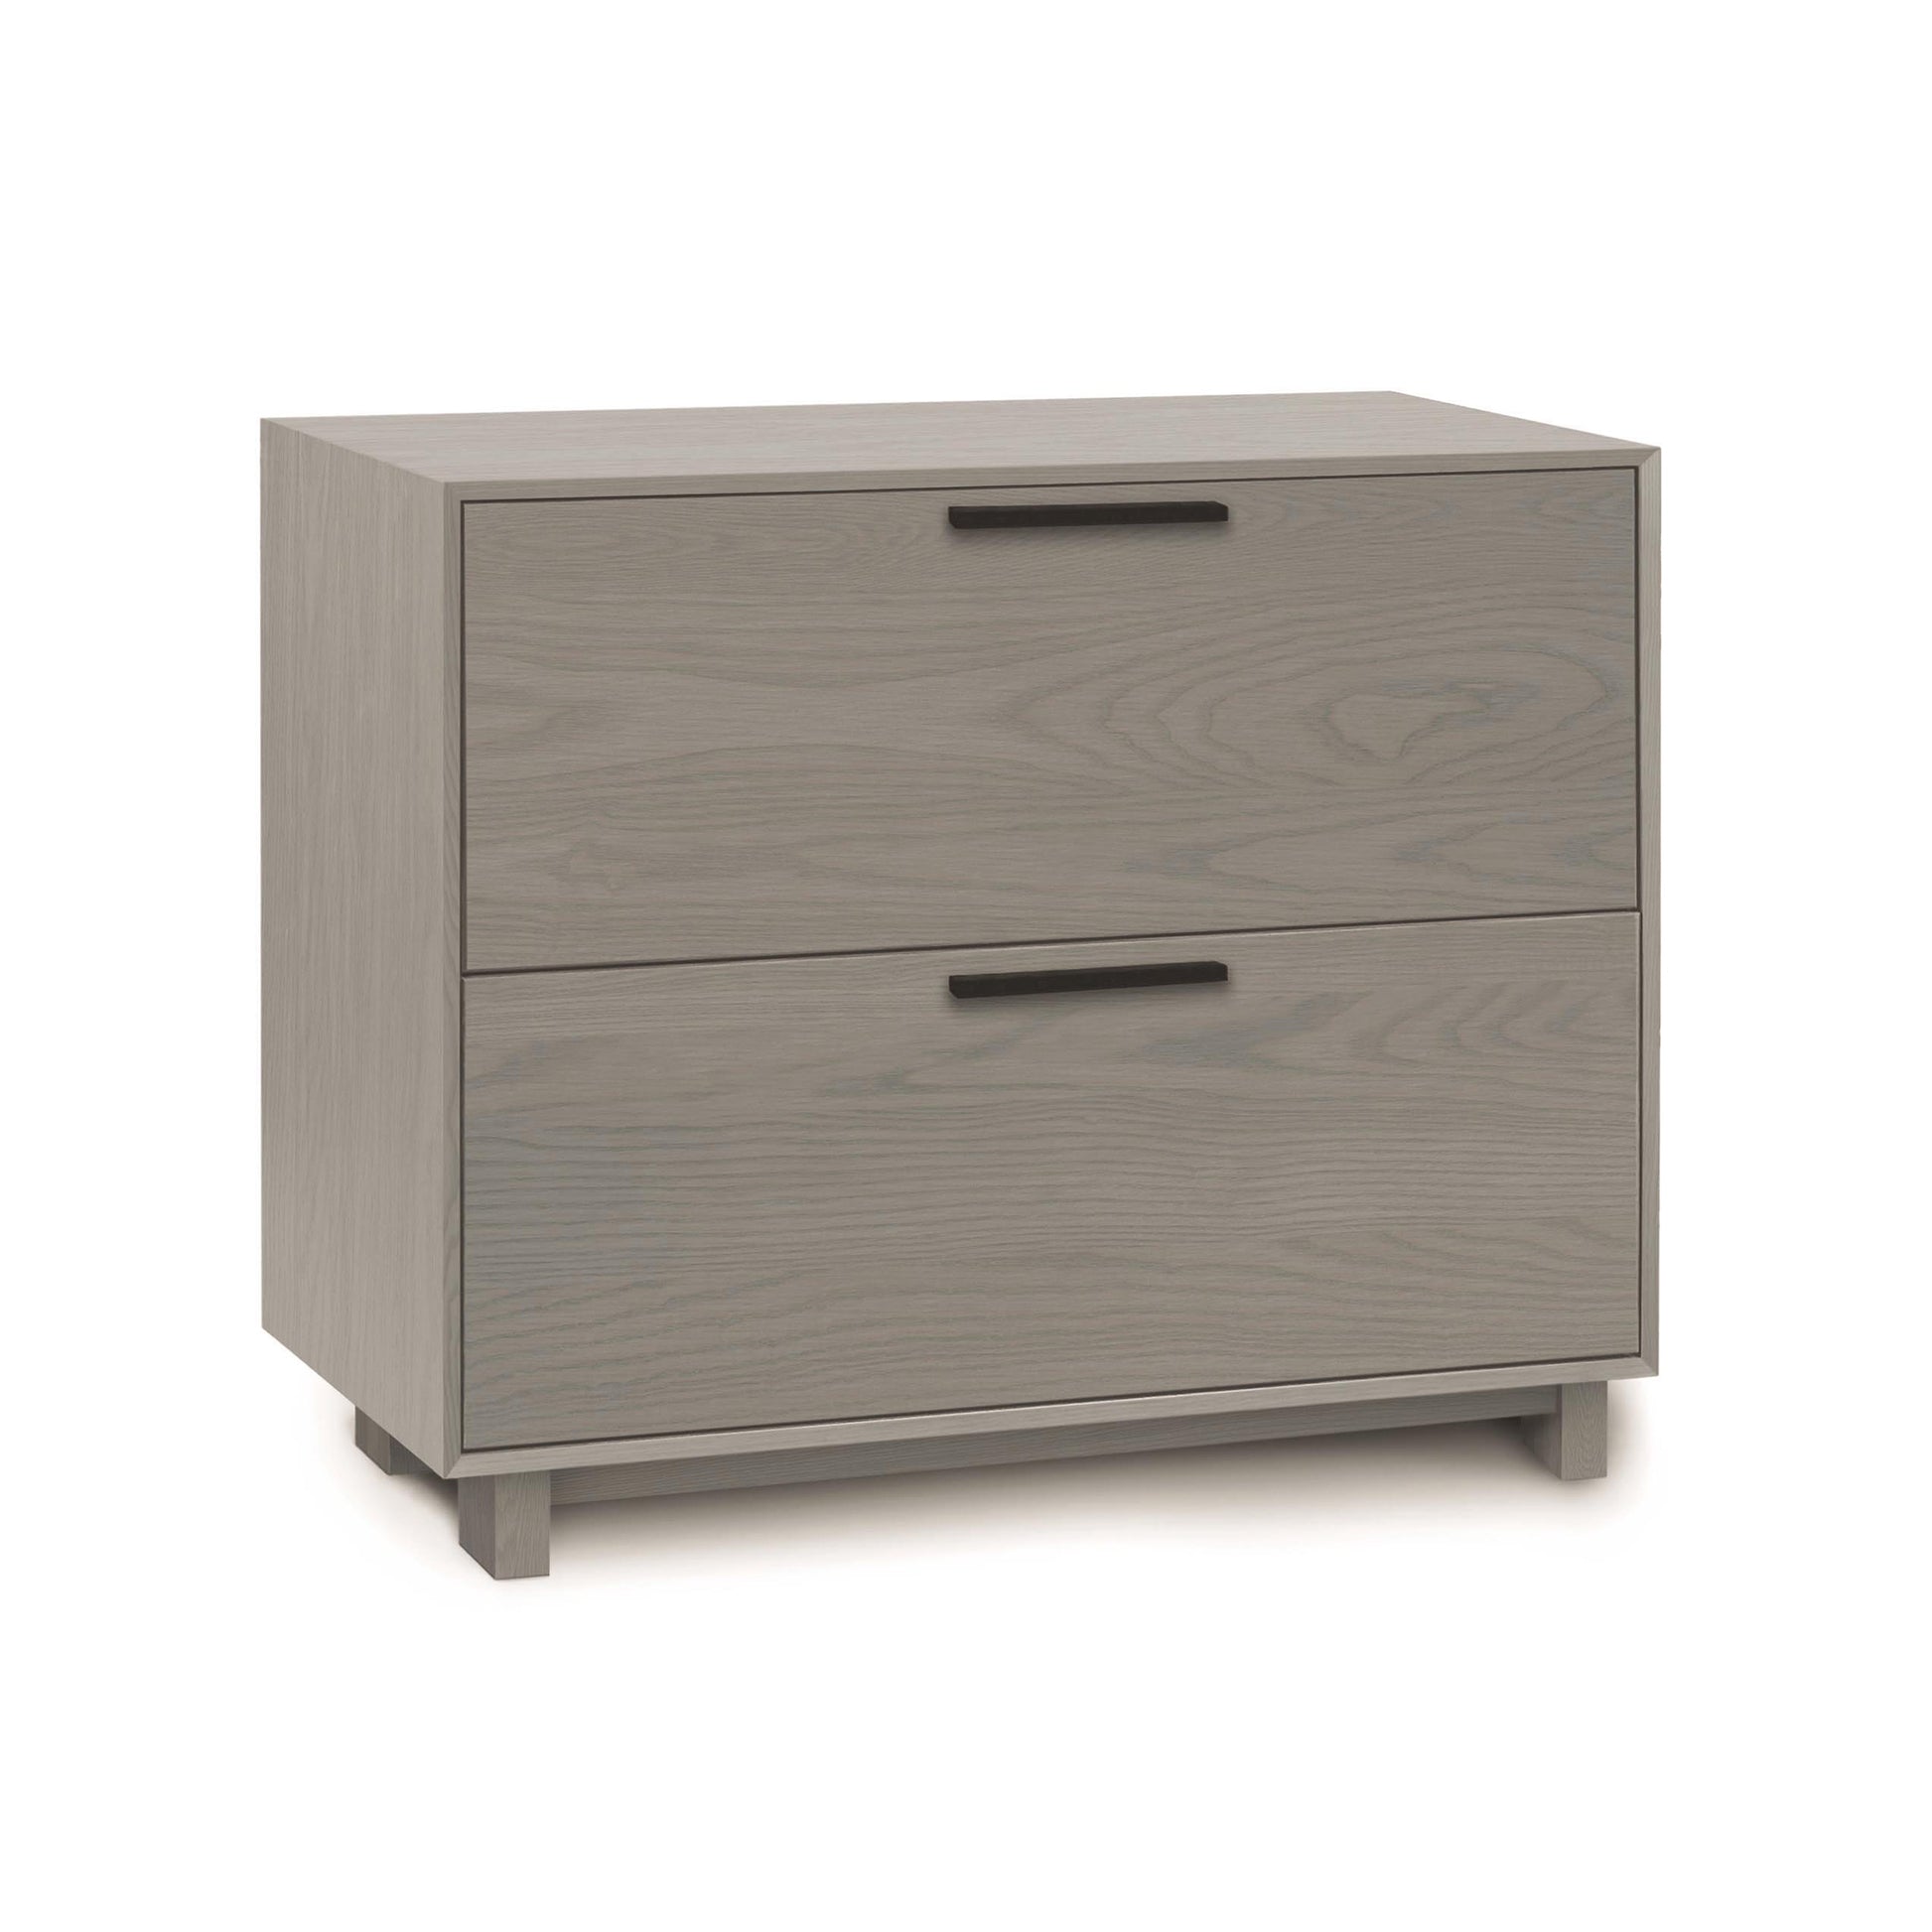 A Linear Lateral File Cabinet by Copeland Furniture with sustainable hardwood construction on a plain background.